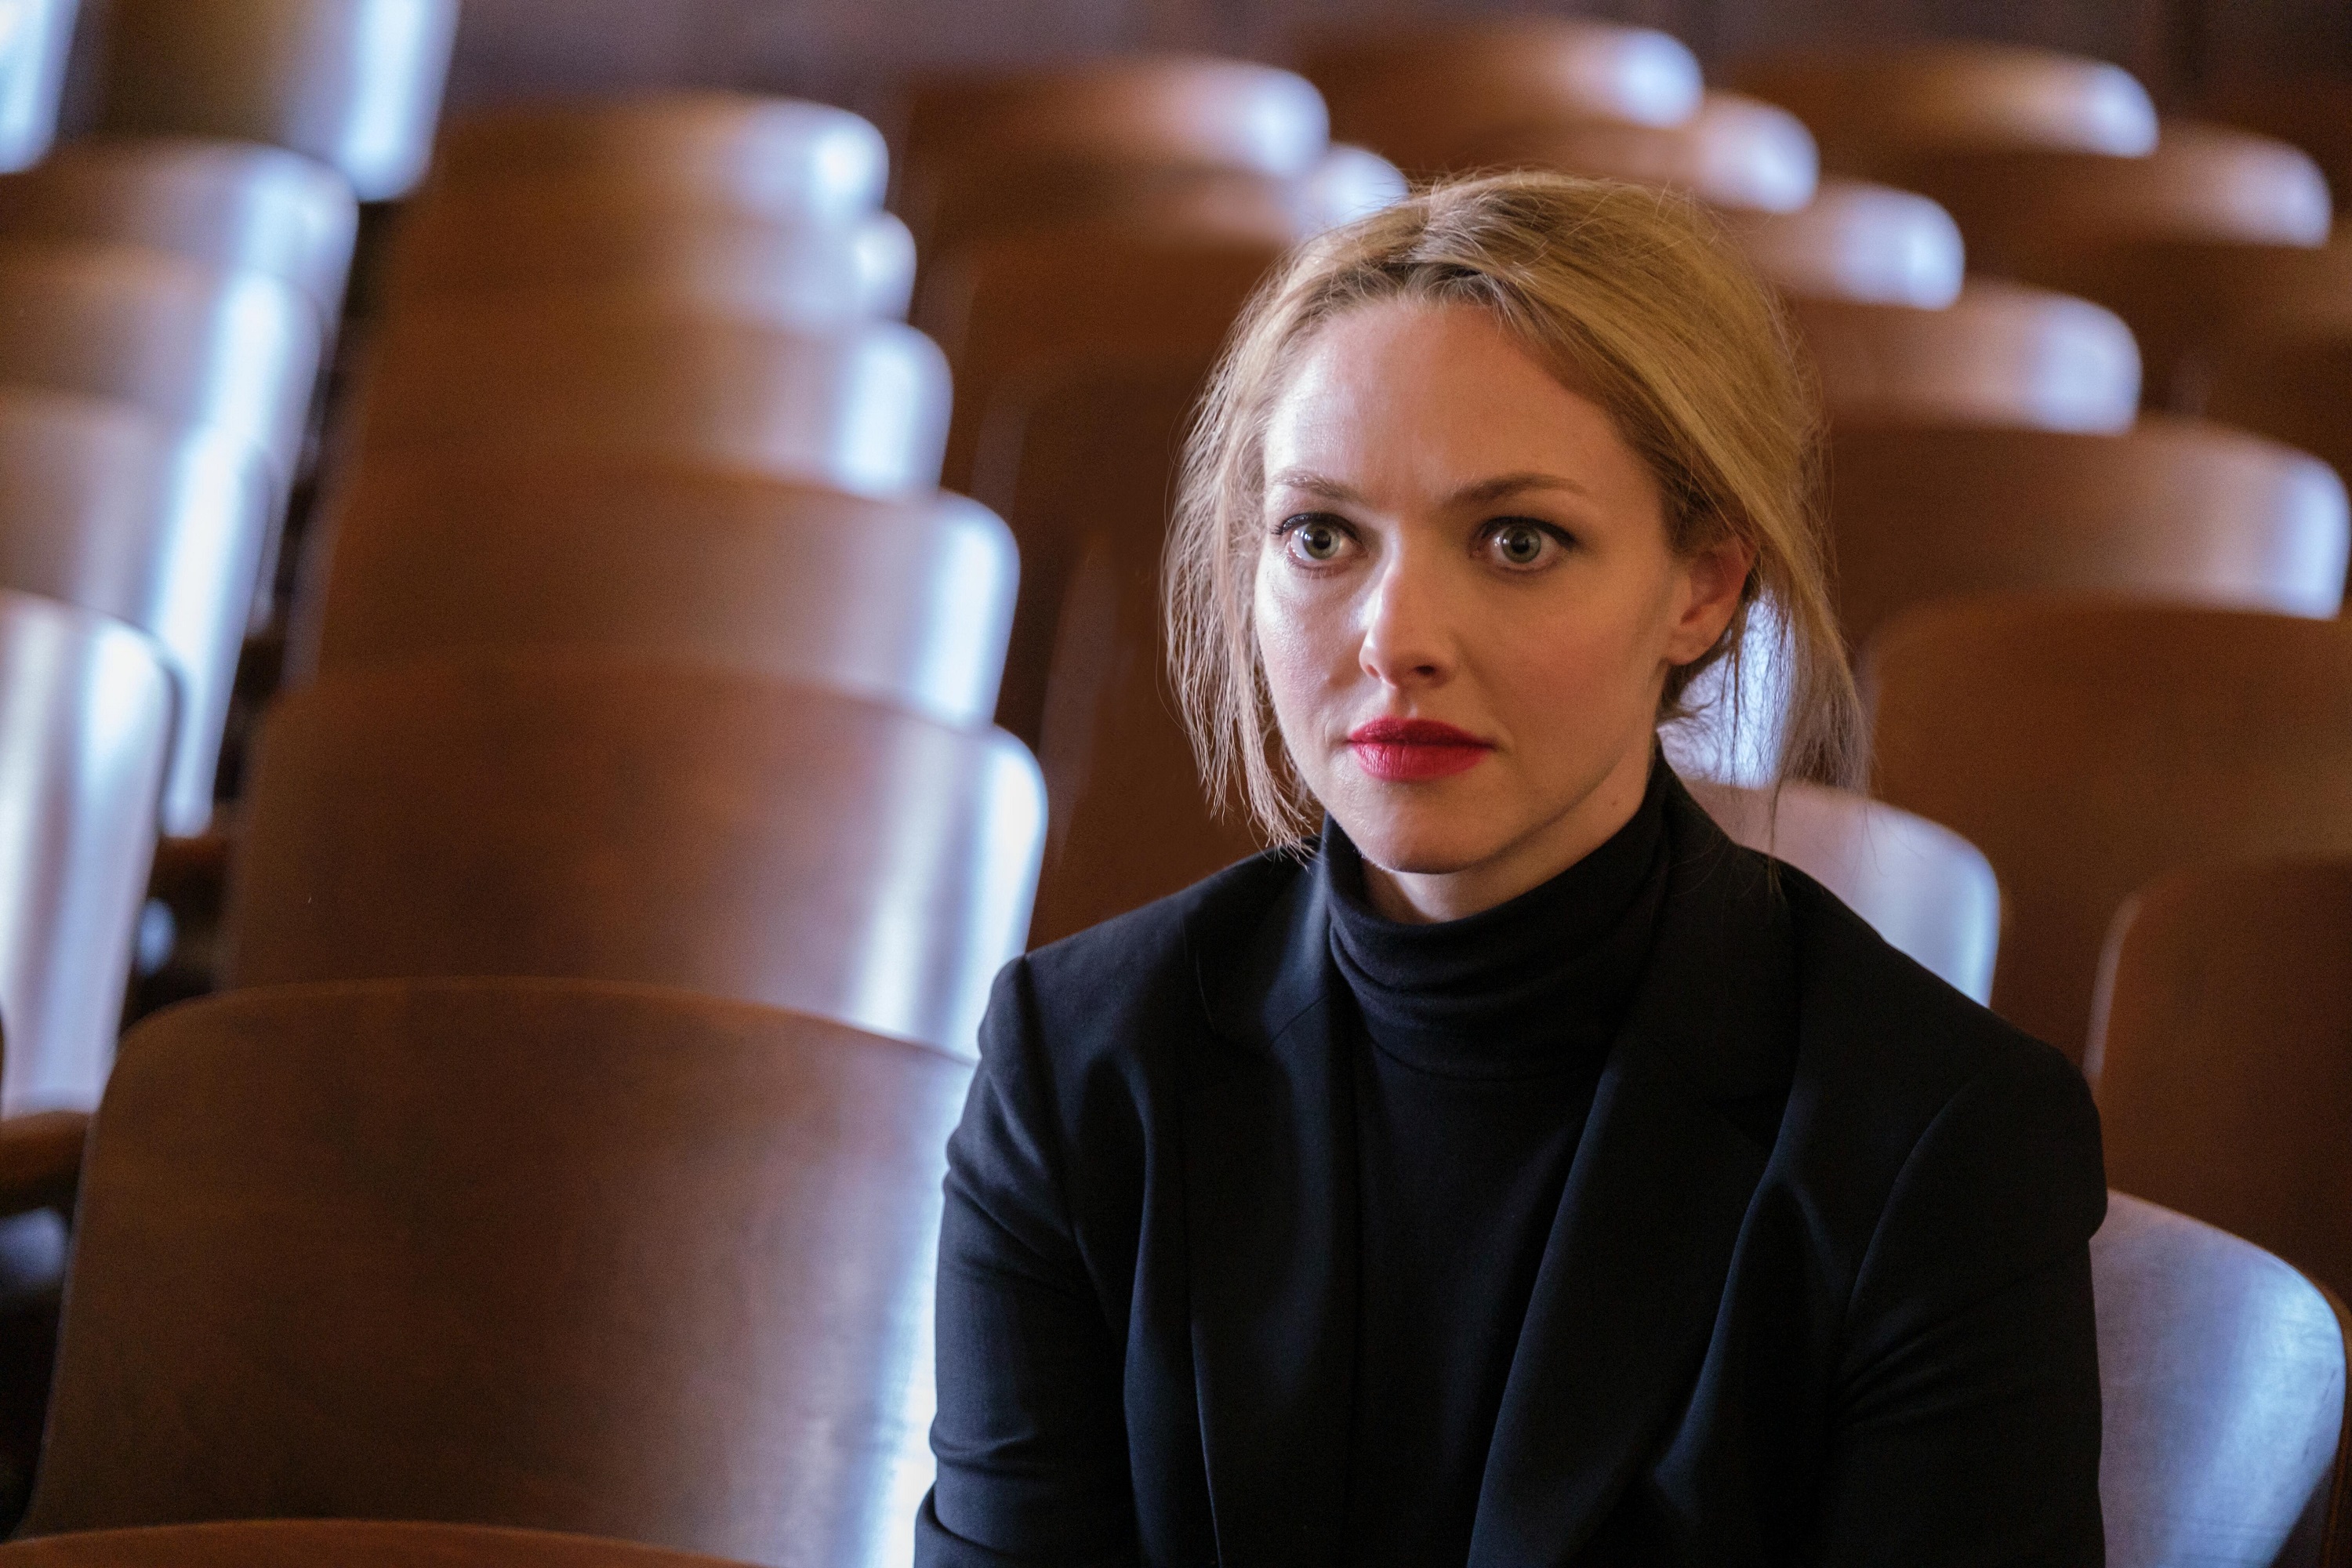 'The Dropout' Amanda Seyfried plays Elizabeth Holmes sitting with her black turtle neck and red lipstick